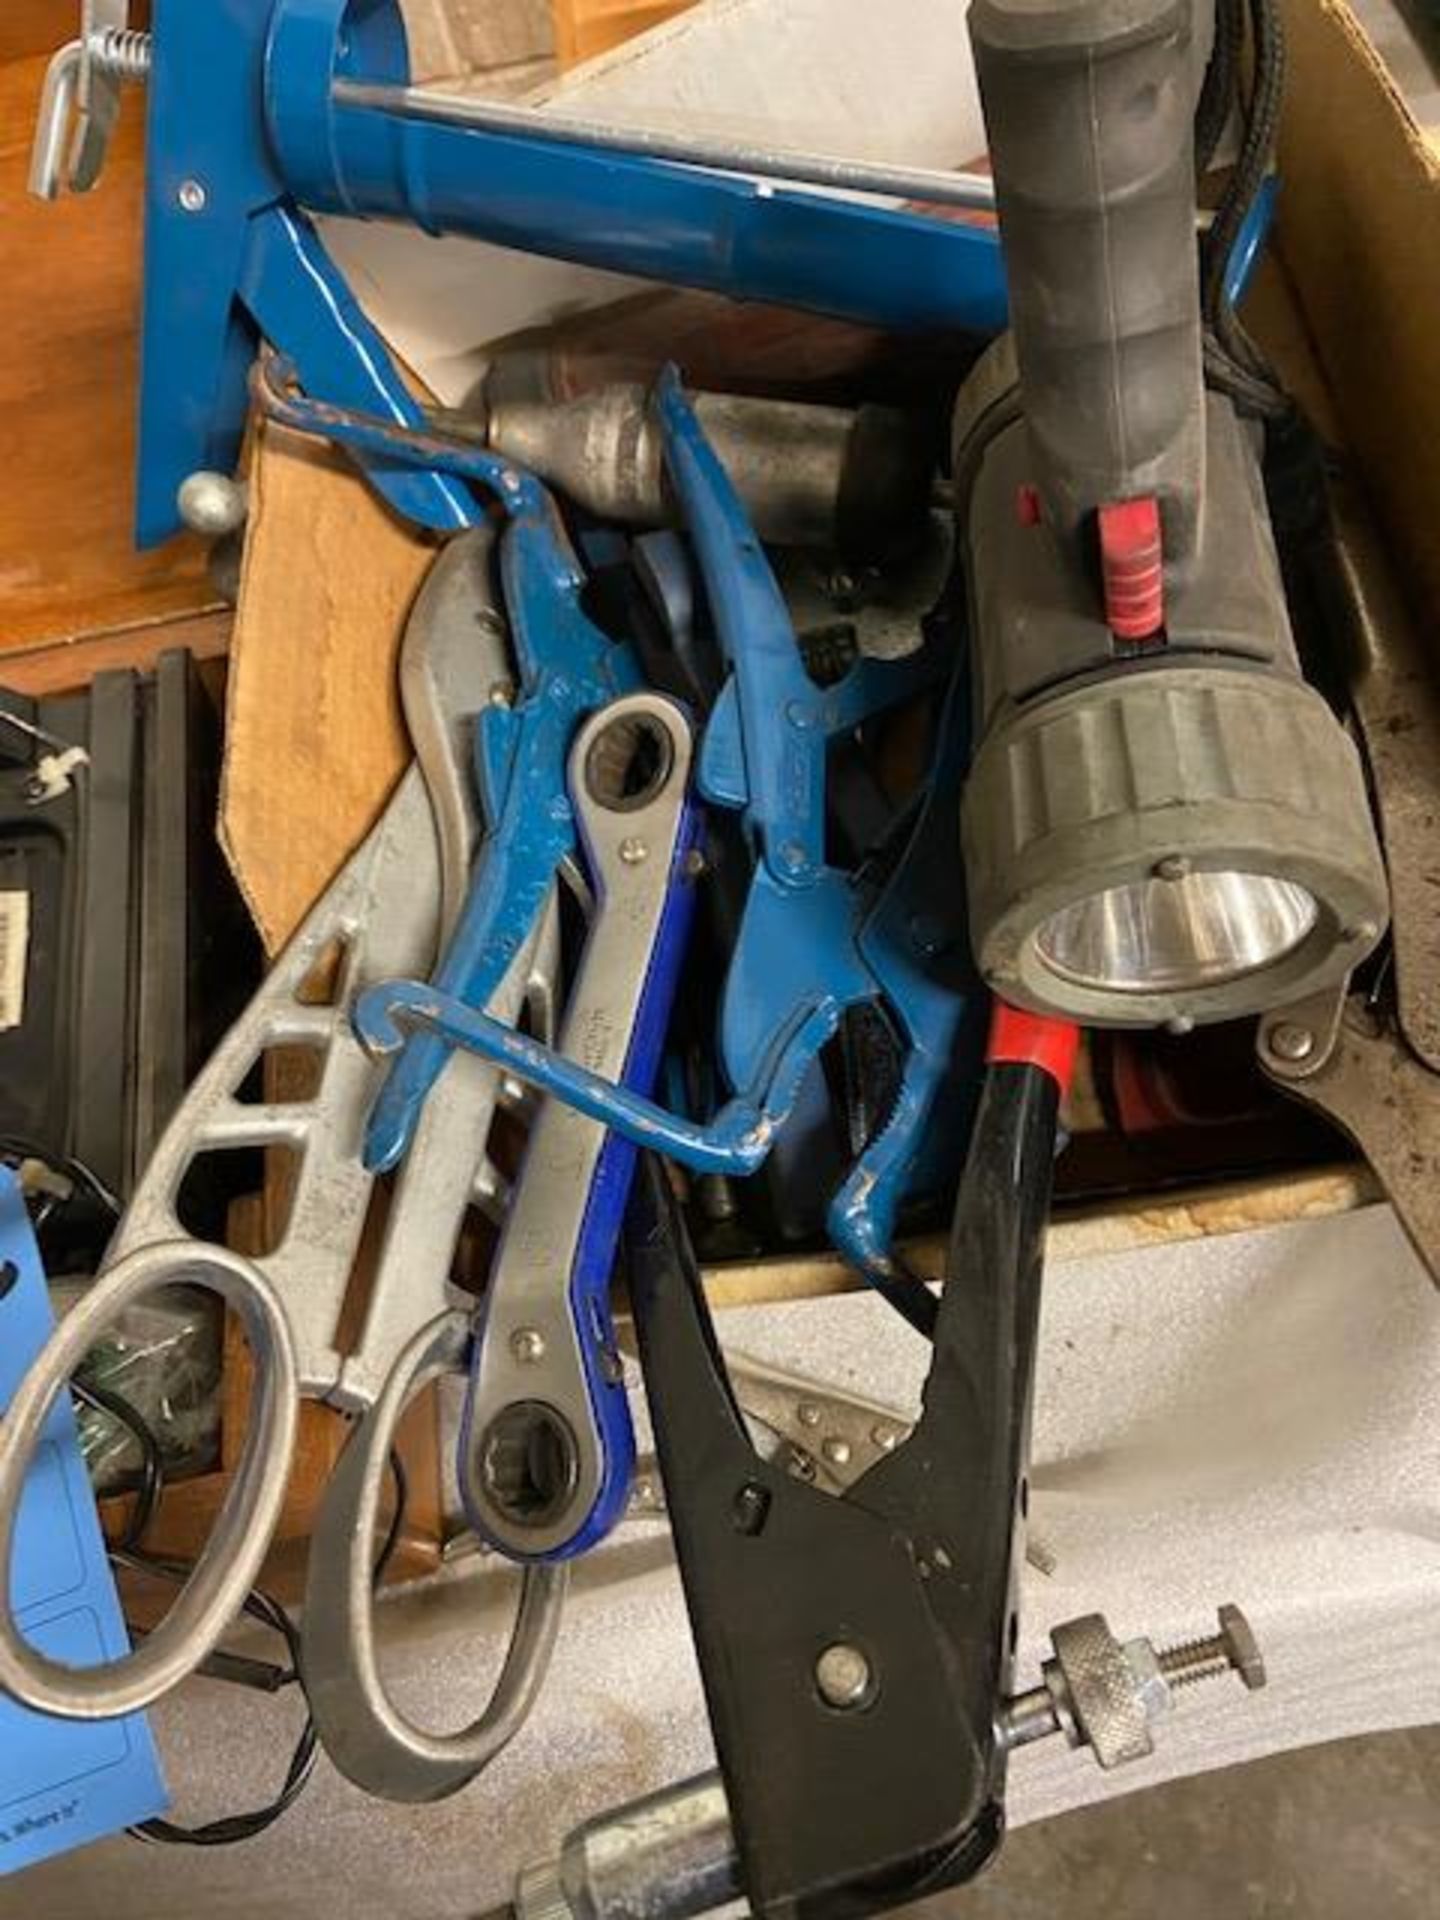 Lot of Misc Tools including Rivit Gun, Clamps, Flashlight, Cutters and more